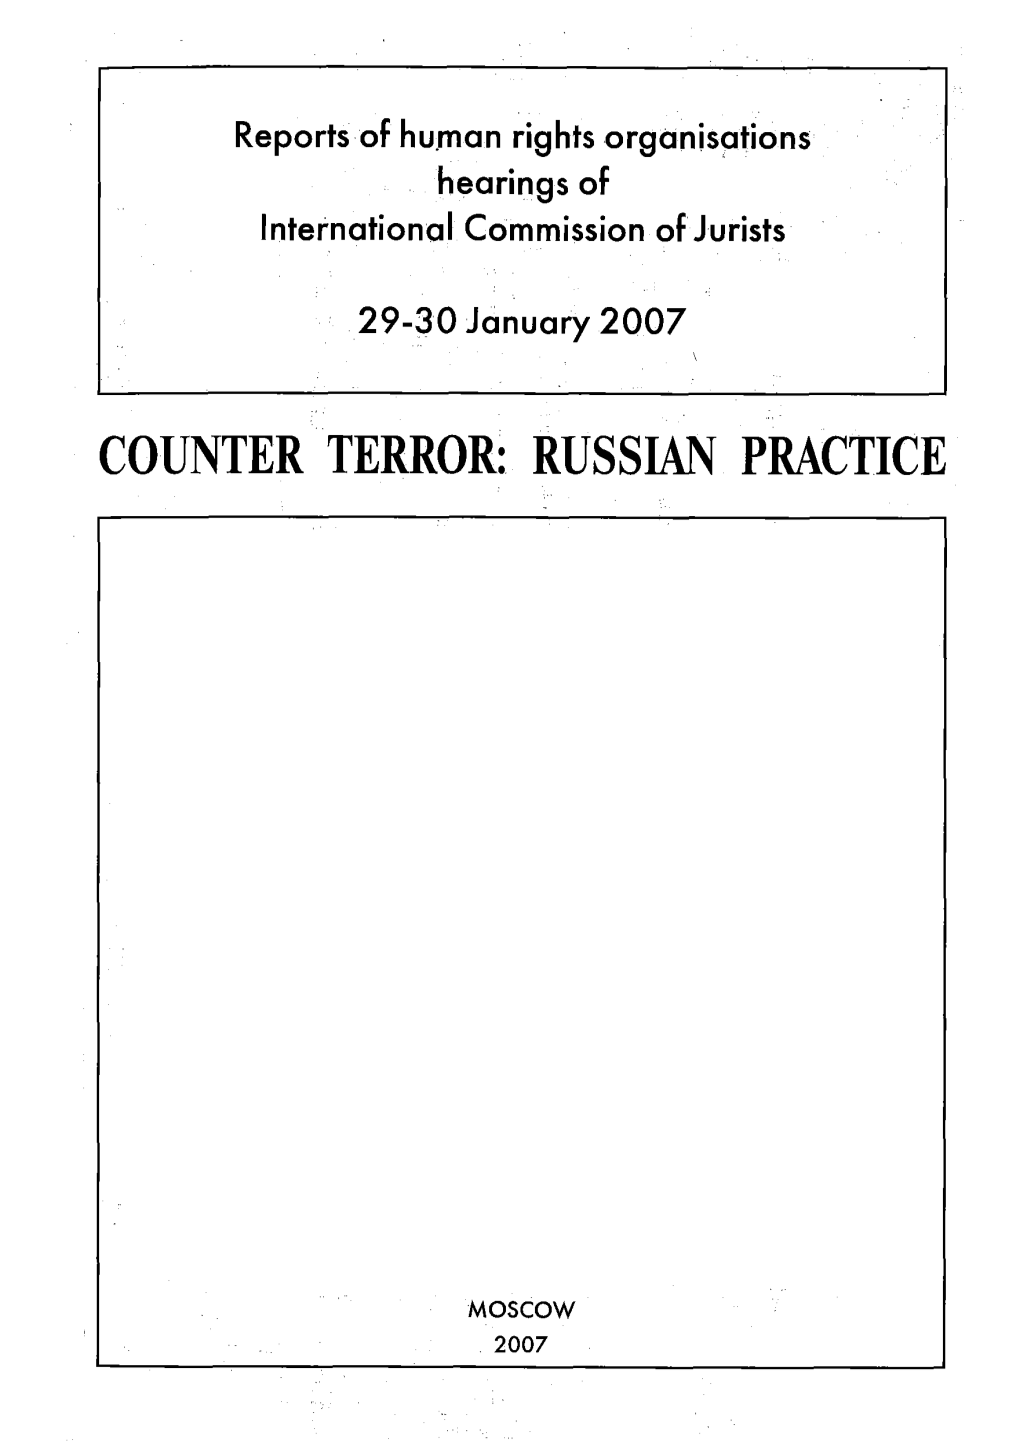 Russia-Counter Terrorism Practice-Conference Report-2007-Eng